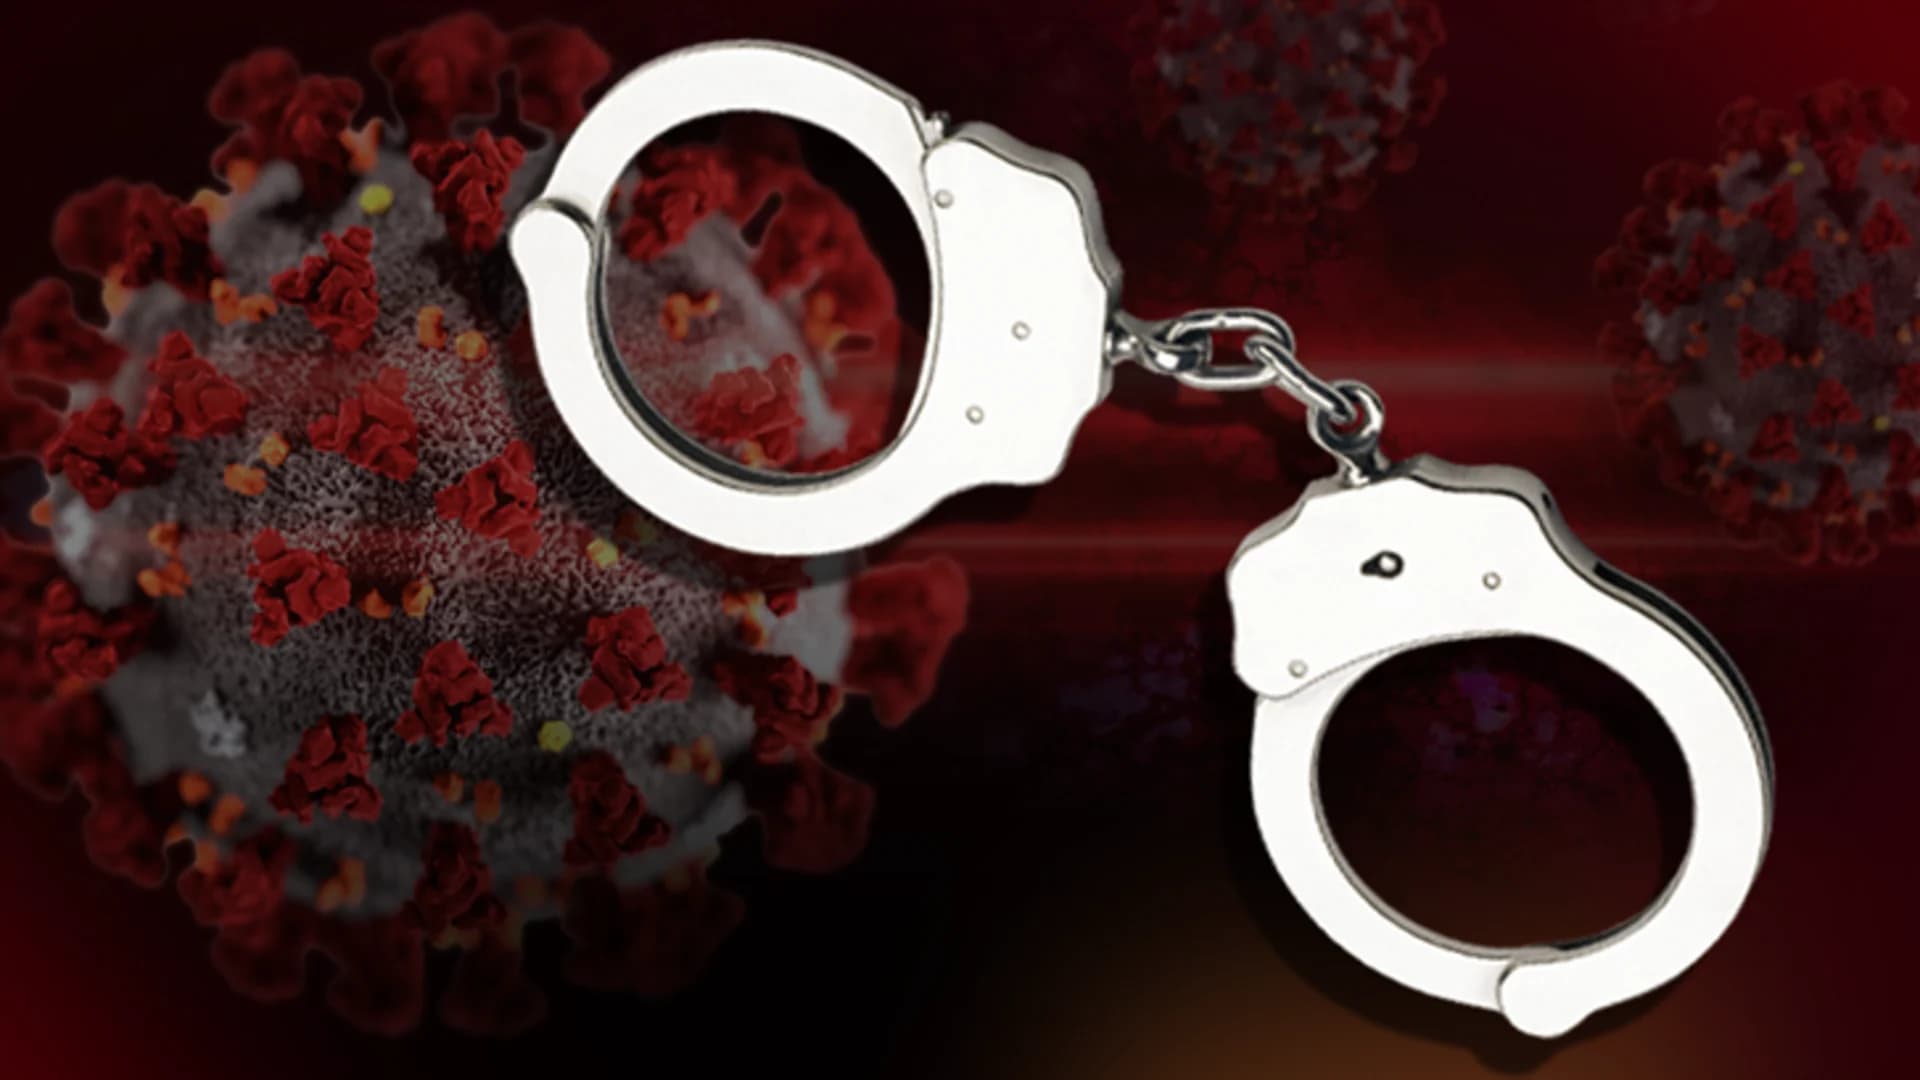 Police: Woman coughed, spit on police multiple times while claiming to have coronavirus during arrest